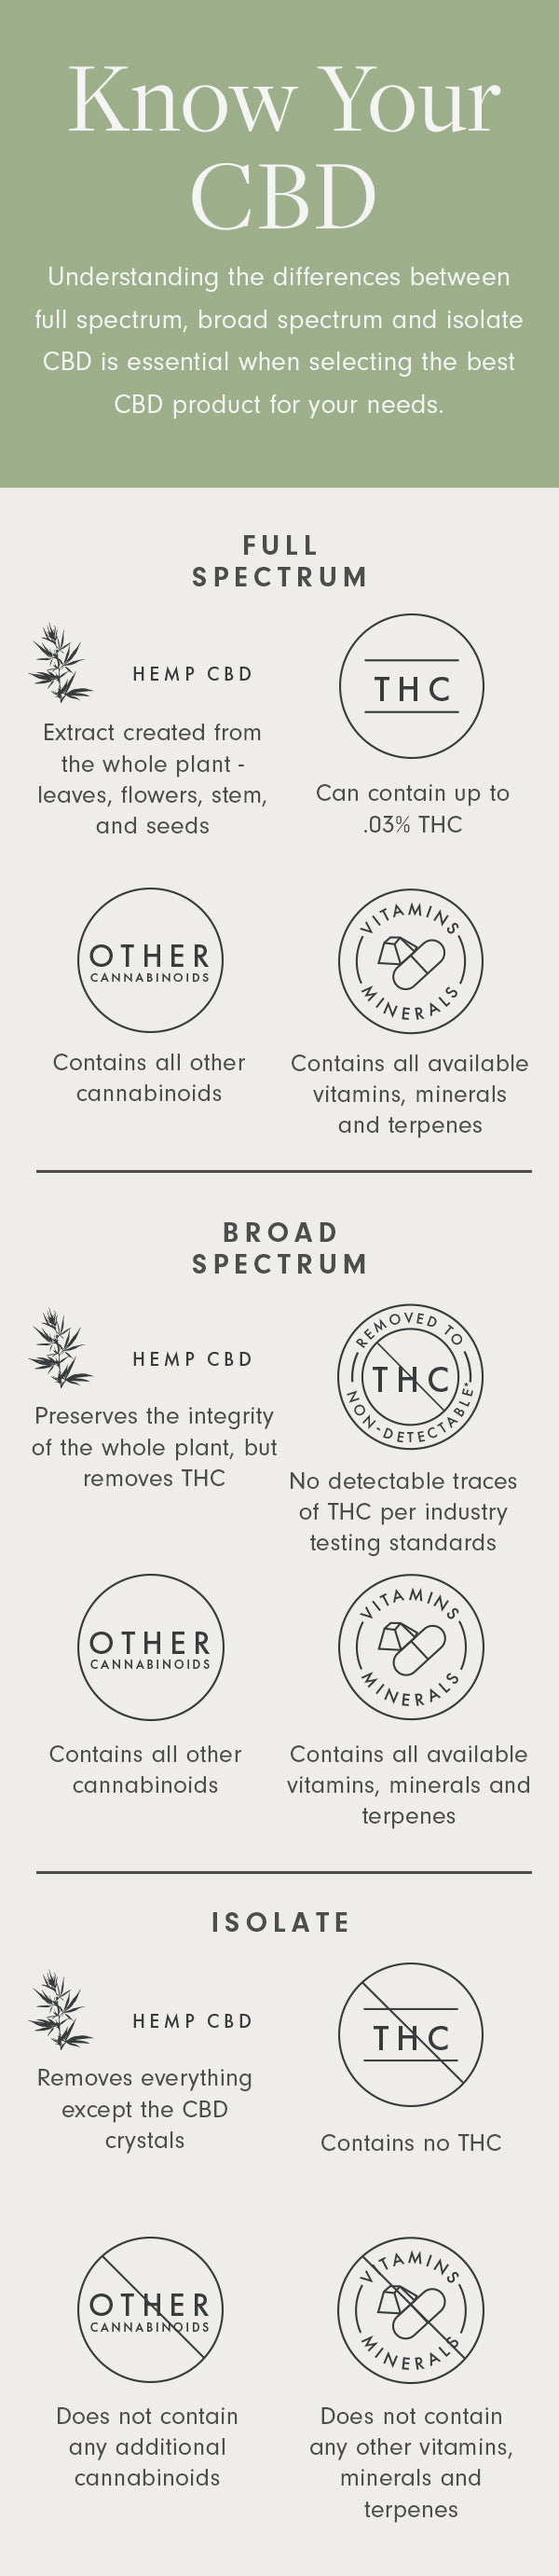 An Sagely Naturals infographic showing the difference between full spectrum CBD, broad spectrum CBD and CBD isolate.